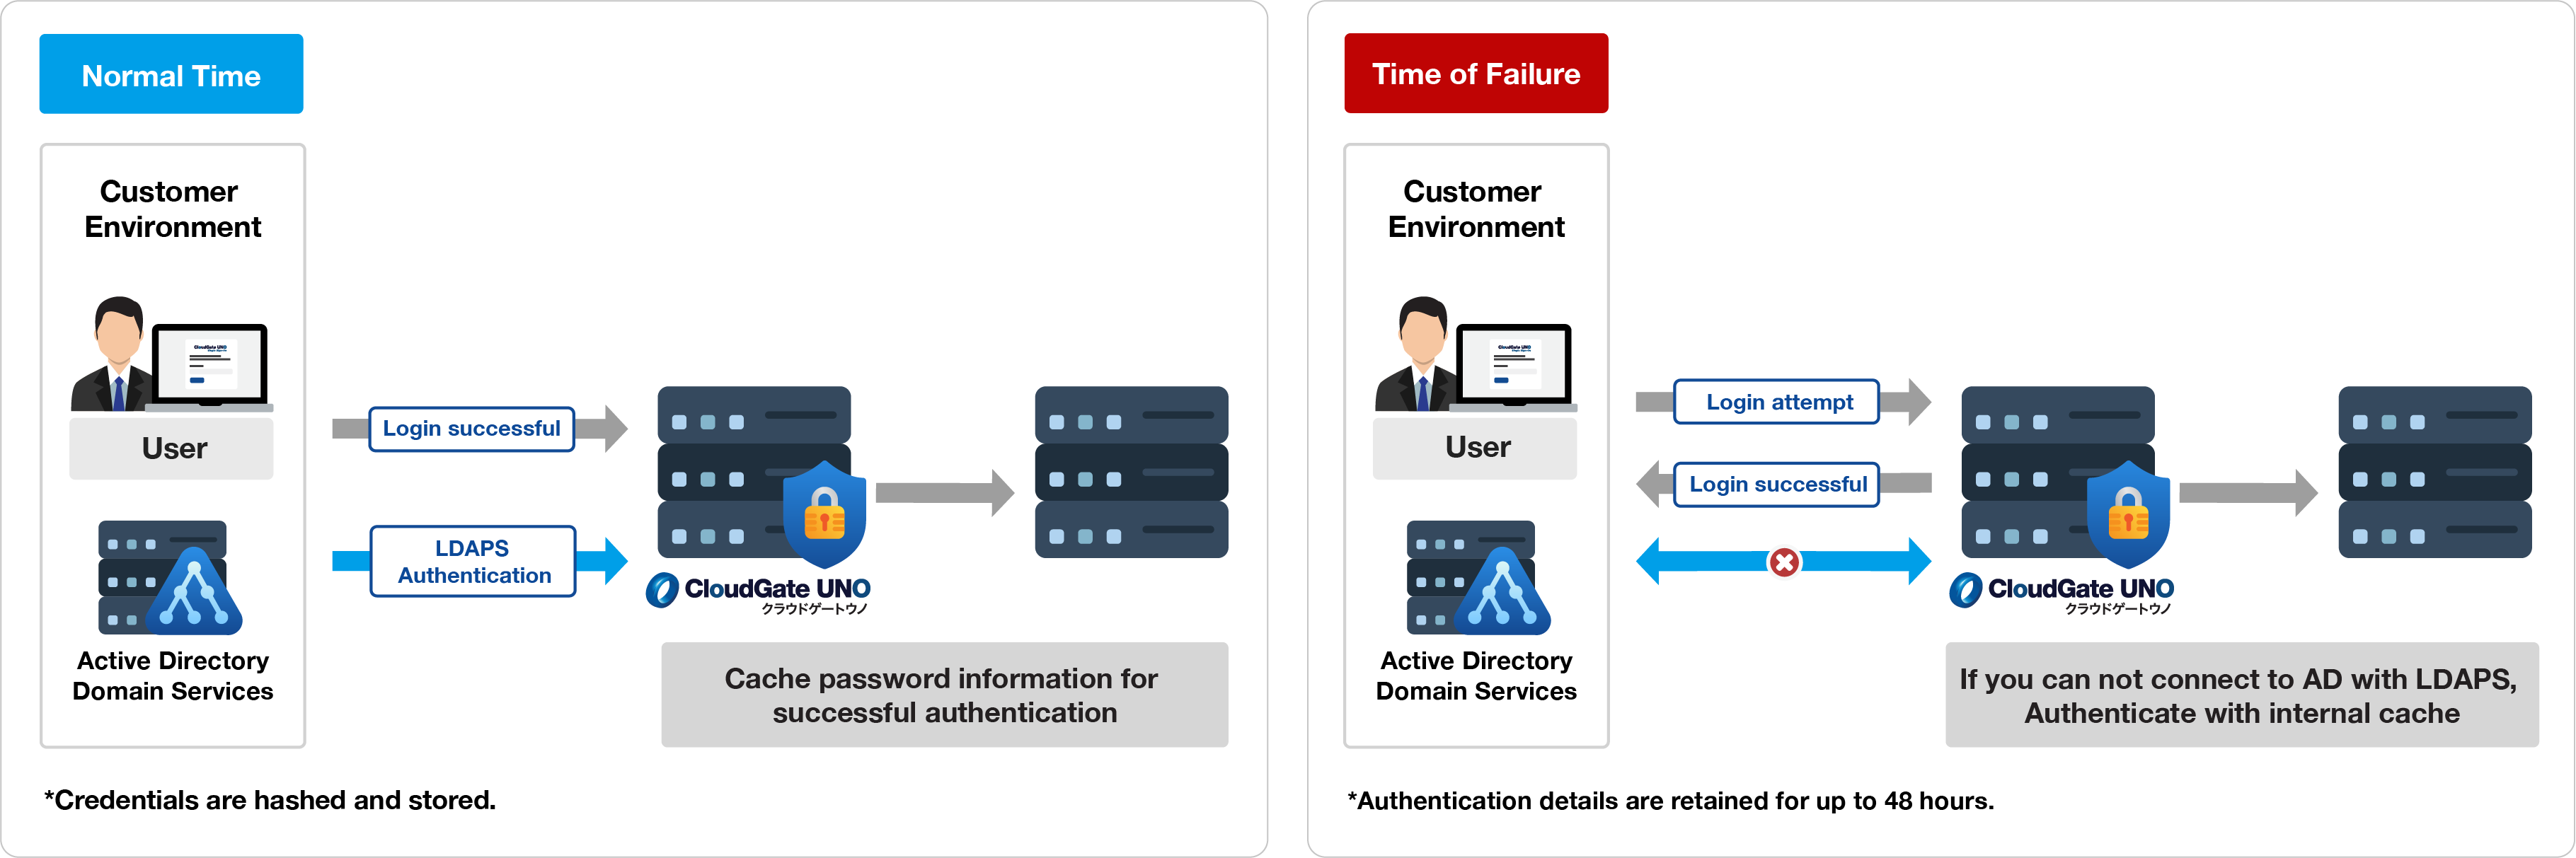 Active Directory authentication information cache function - Active Directory